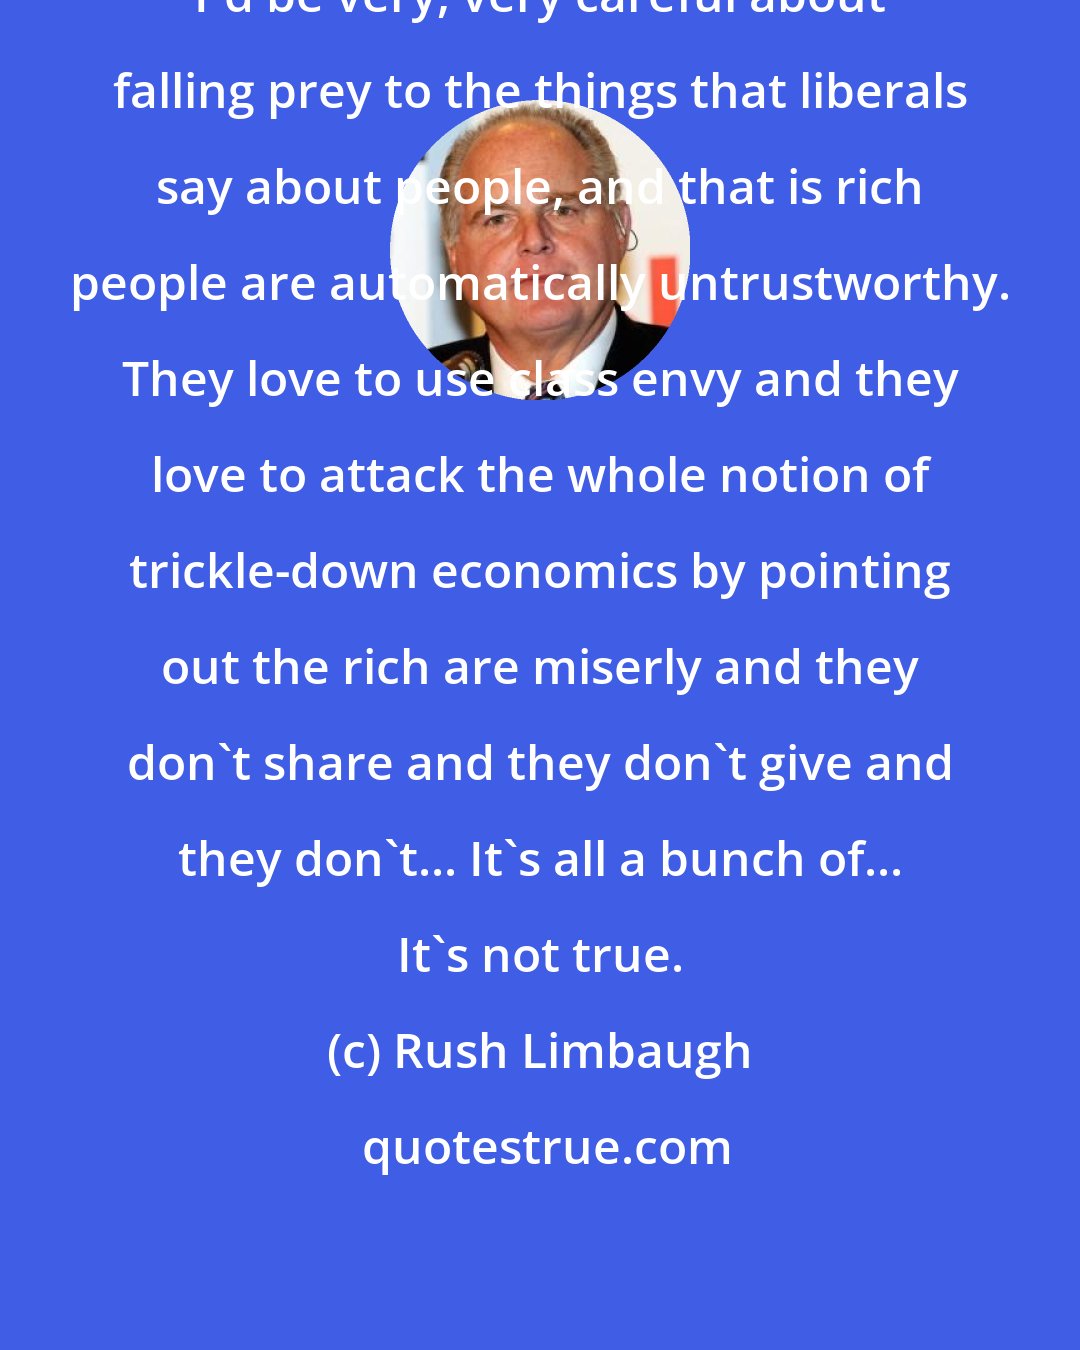 Rush Limbaugh: I'd be very, very careful about falling prey to the things that liberals say about people, and that is rich people are automatically untrustworthy. They love to use class envy and they love to attack the whole notion of trickle-down economics by pointing out the rich are miserly and they don't share and they don't give and they don't... It's all a bunch of... It's not true.